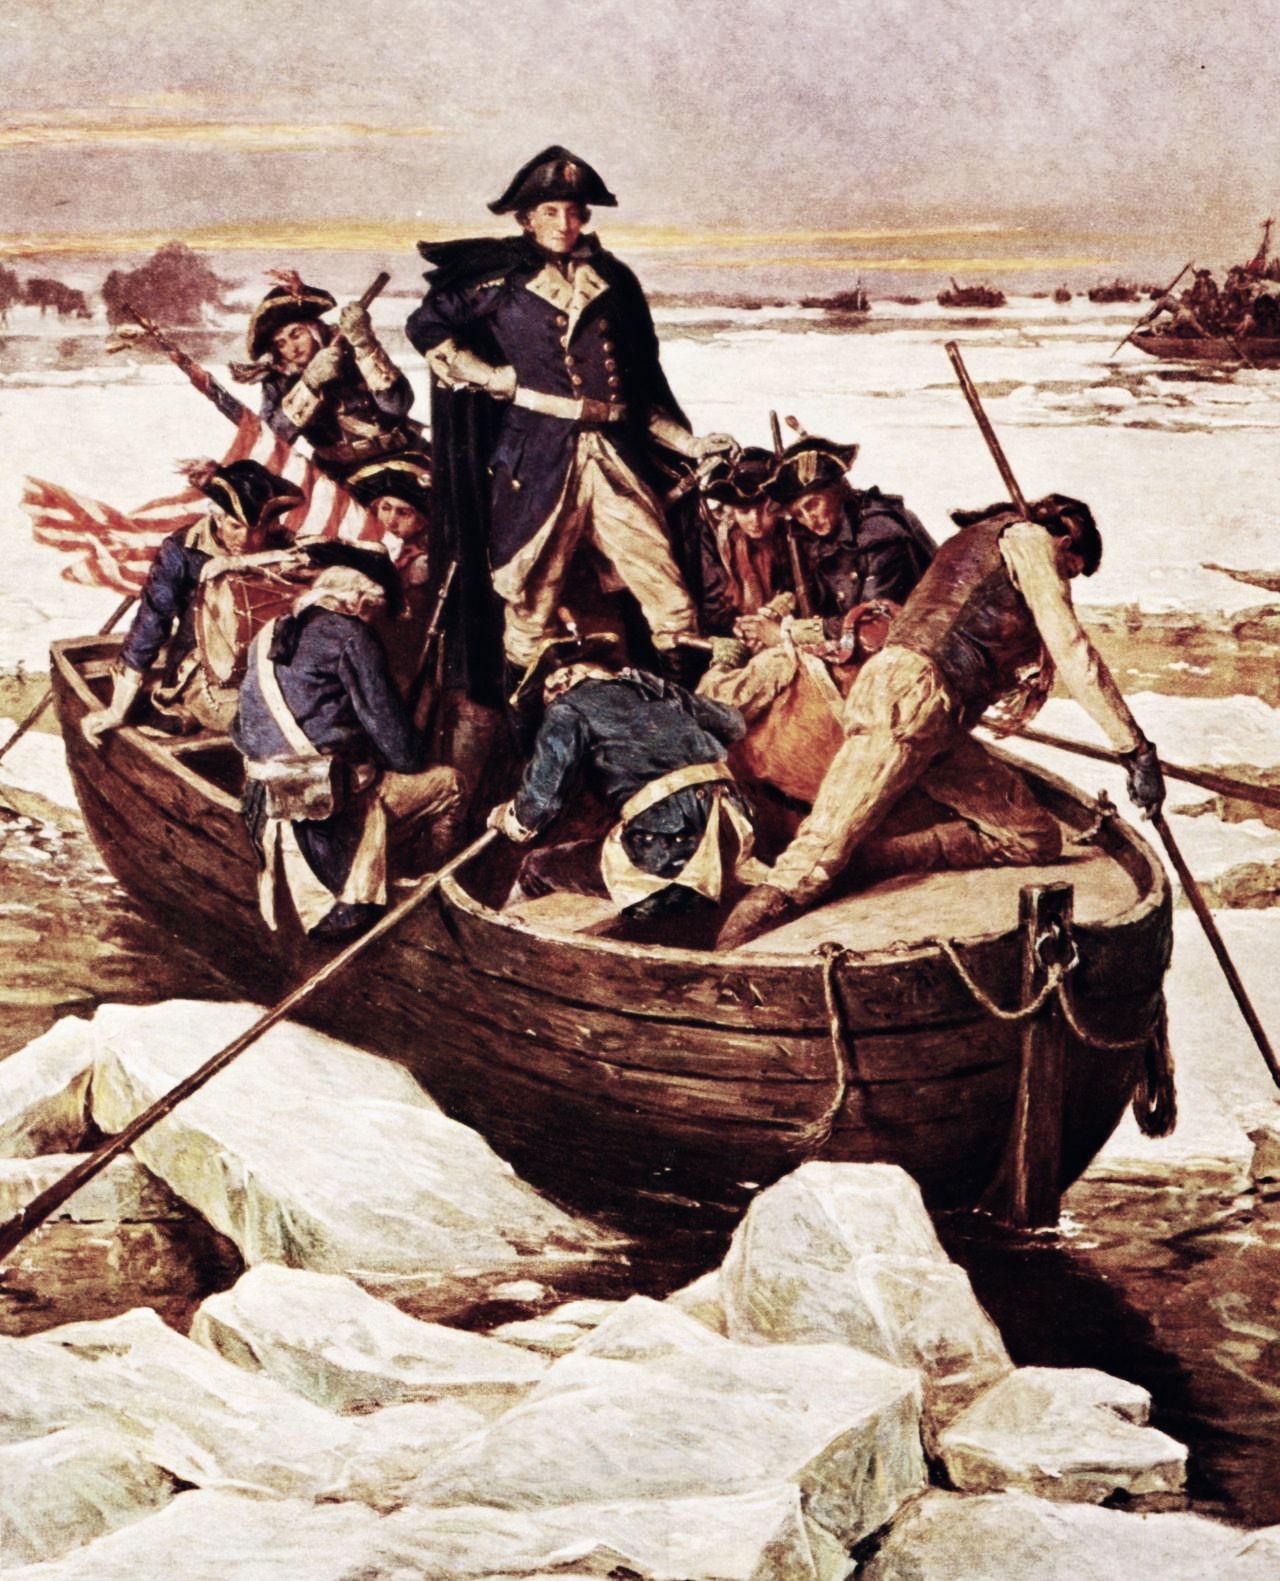 Crossing the ice-filled Delaware River at night required experienced seamen to man the boats..